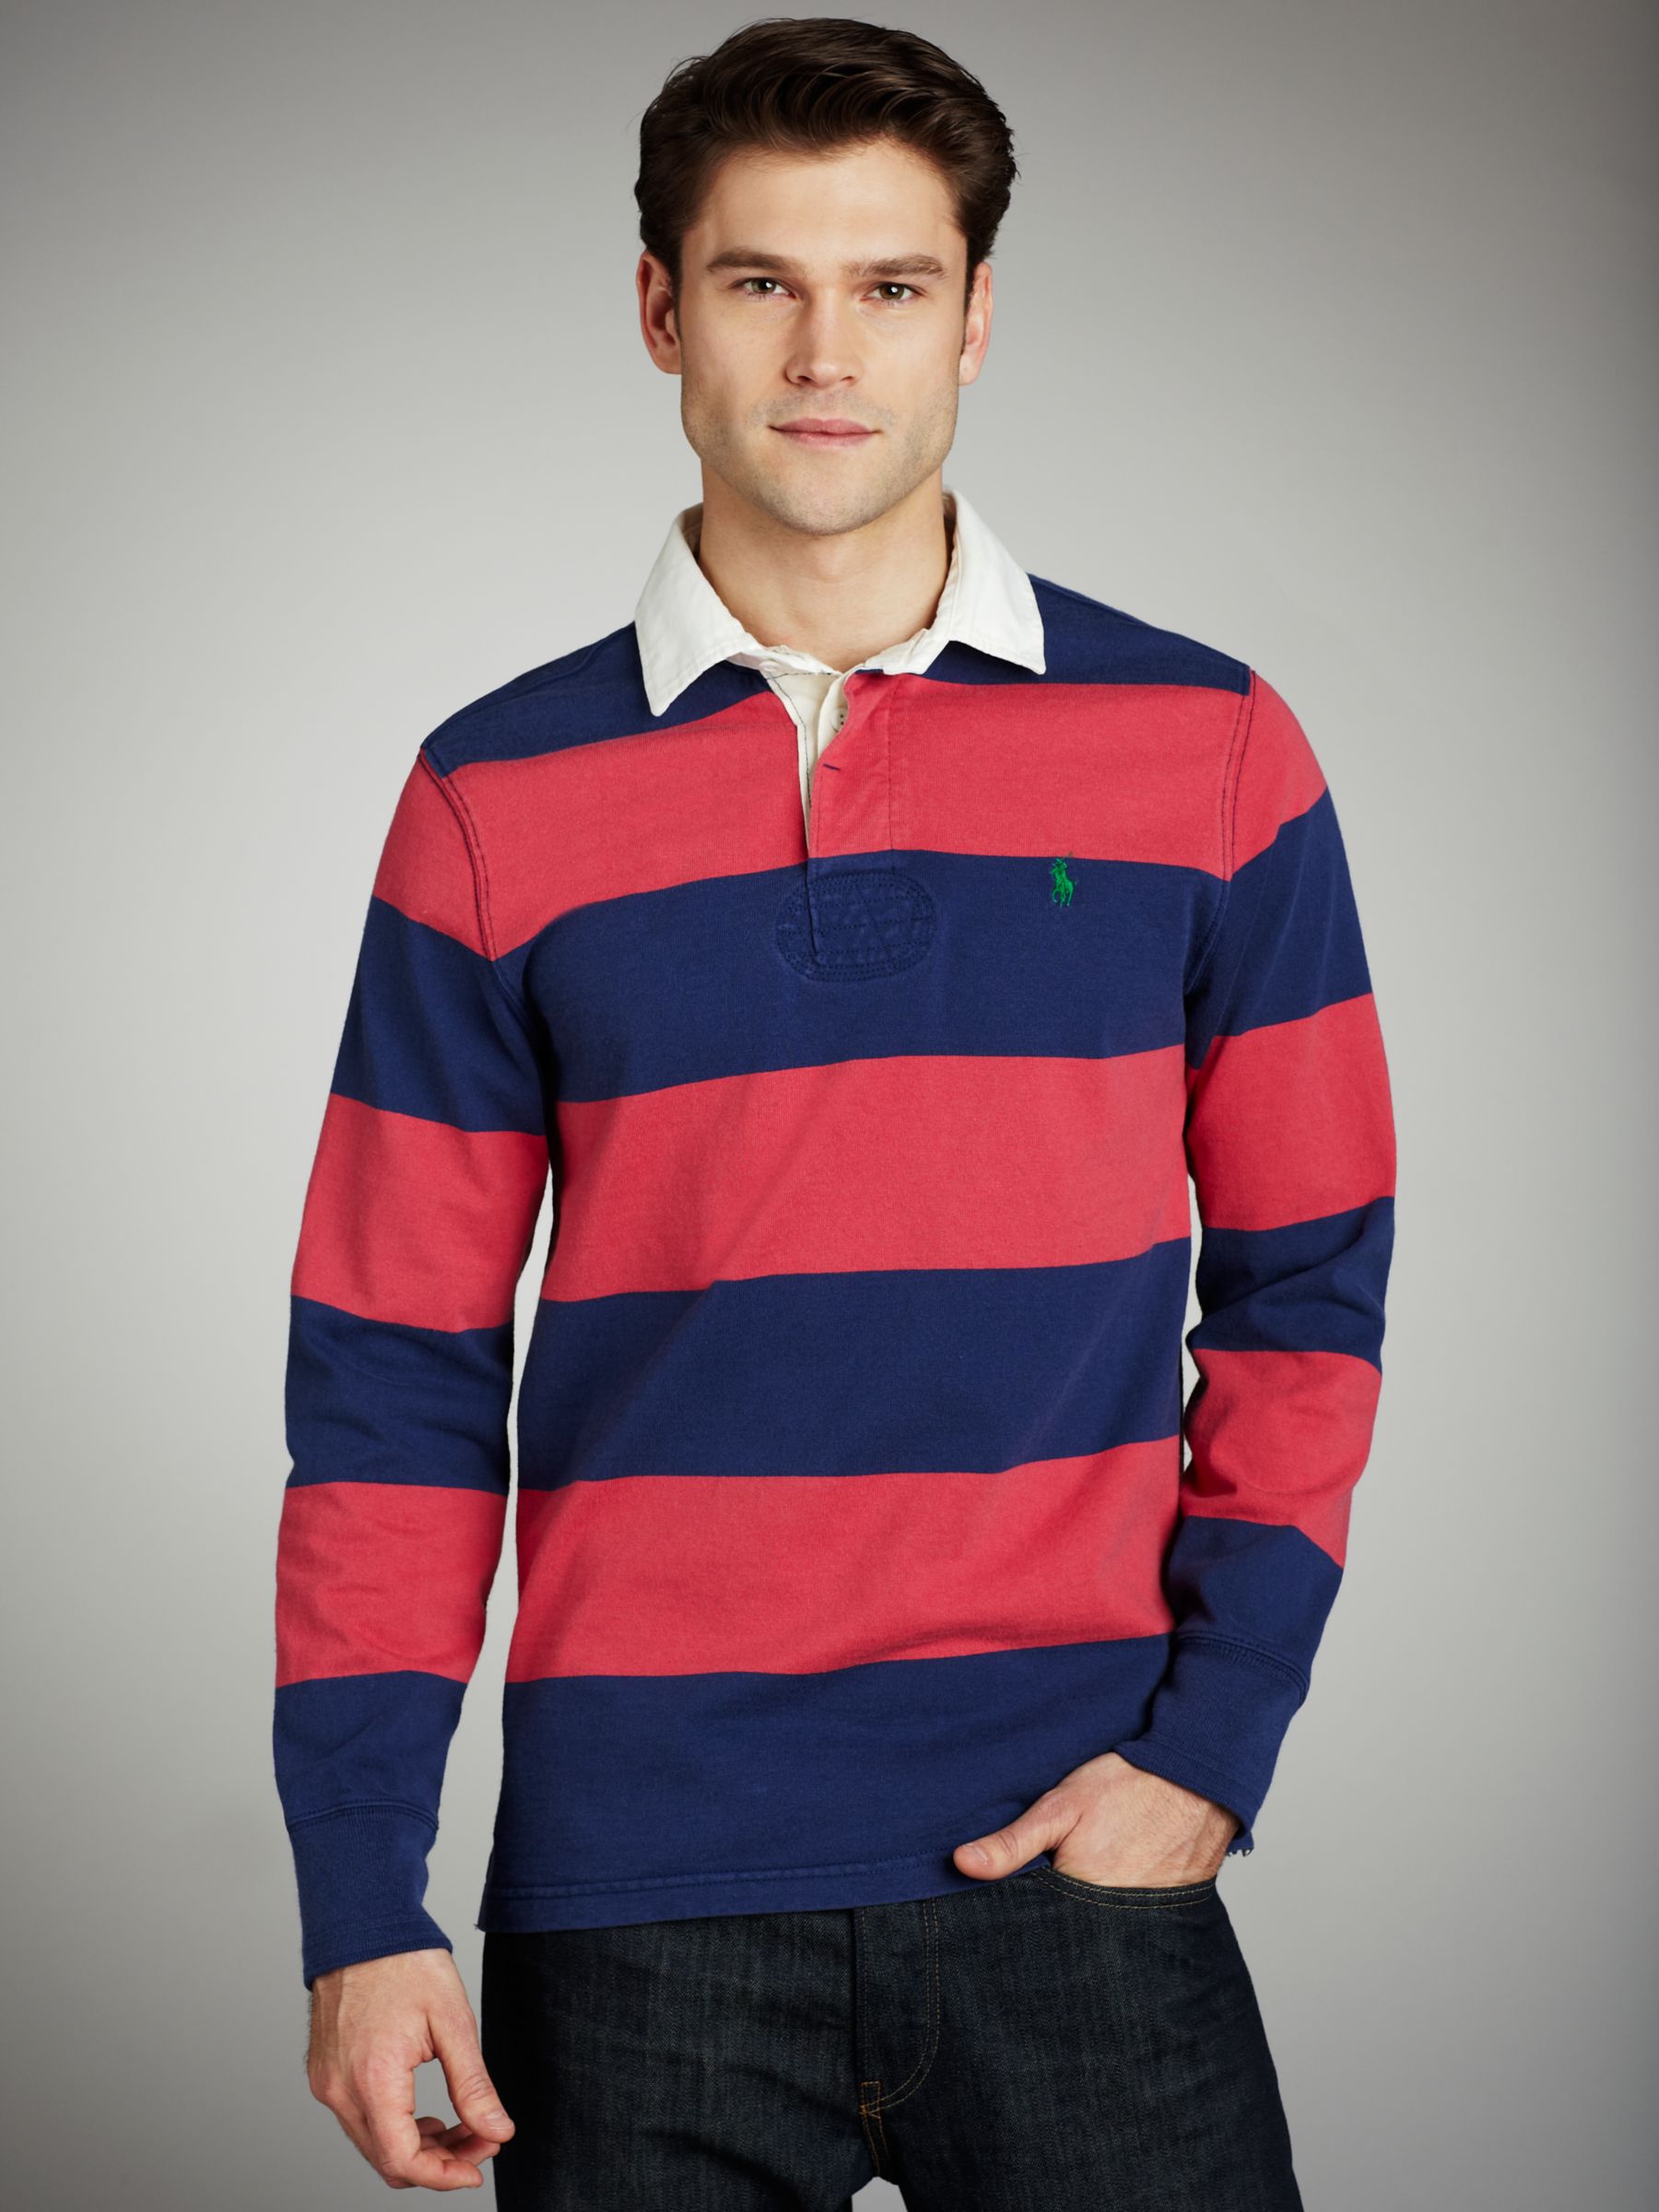 Custom-Fit Rugby Shirt, Red/blue